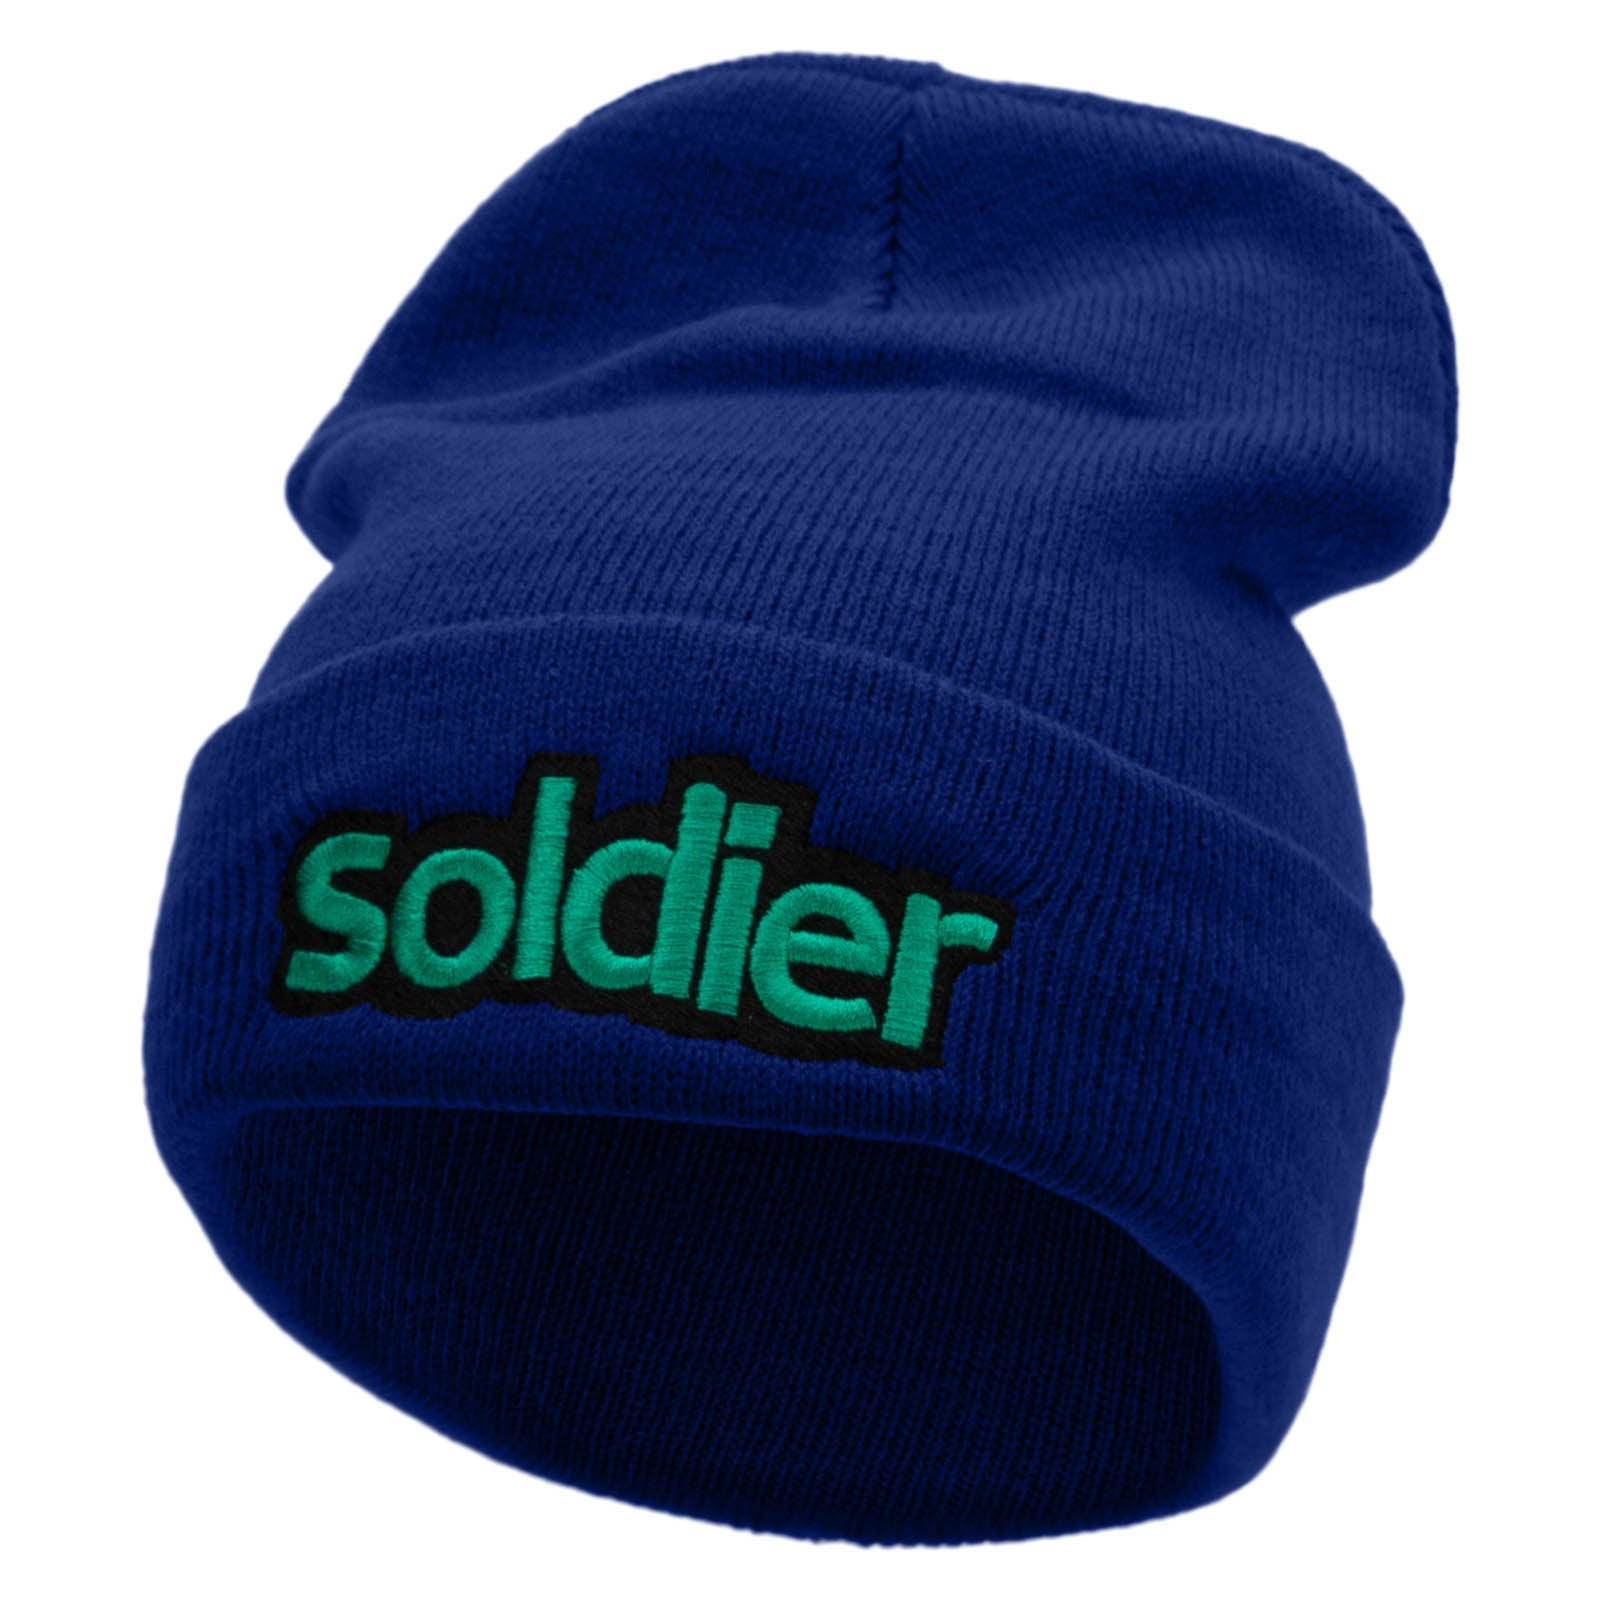 Soldier Embroidered 12 Inch Long Knitted Beanie - Royal OSFM